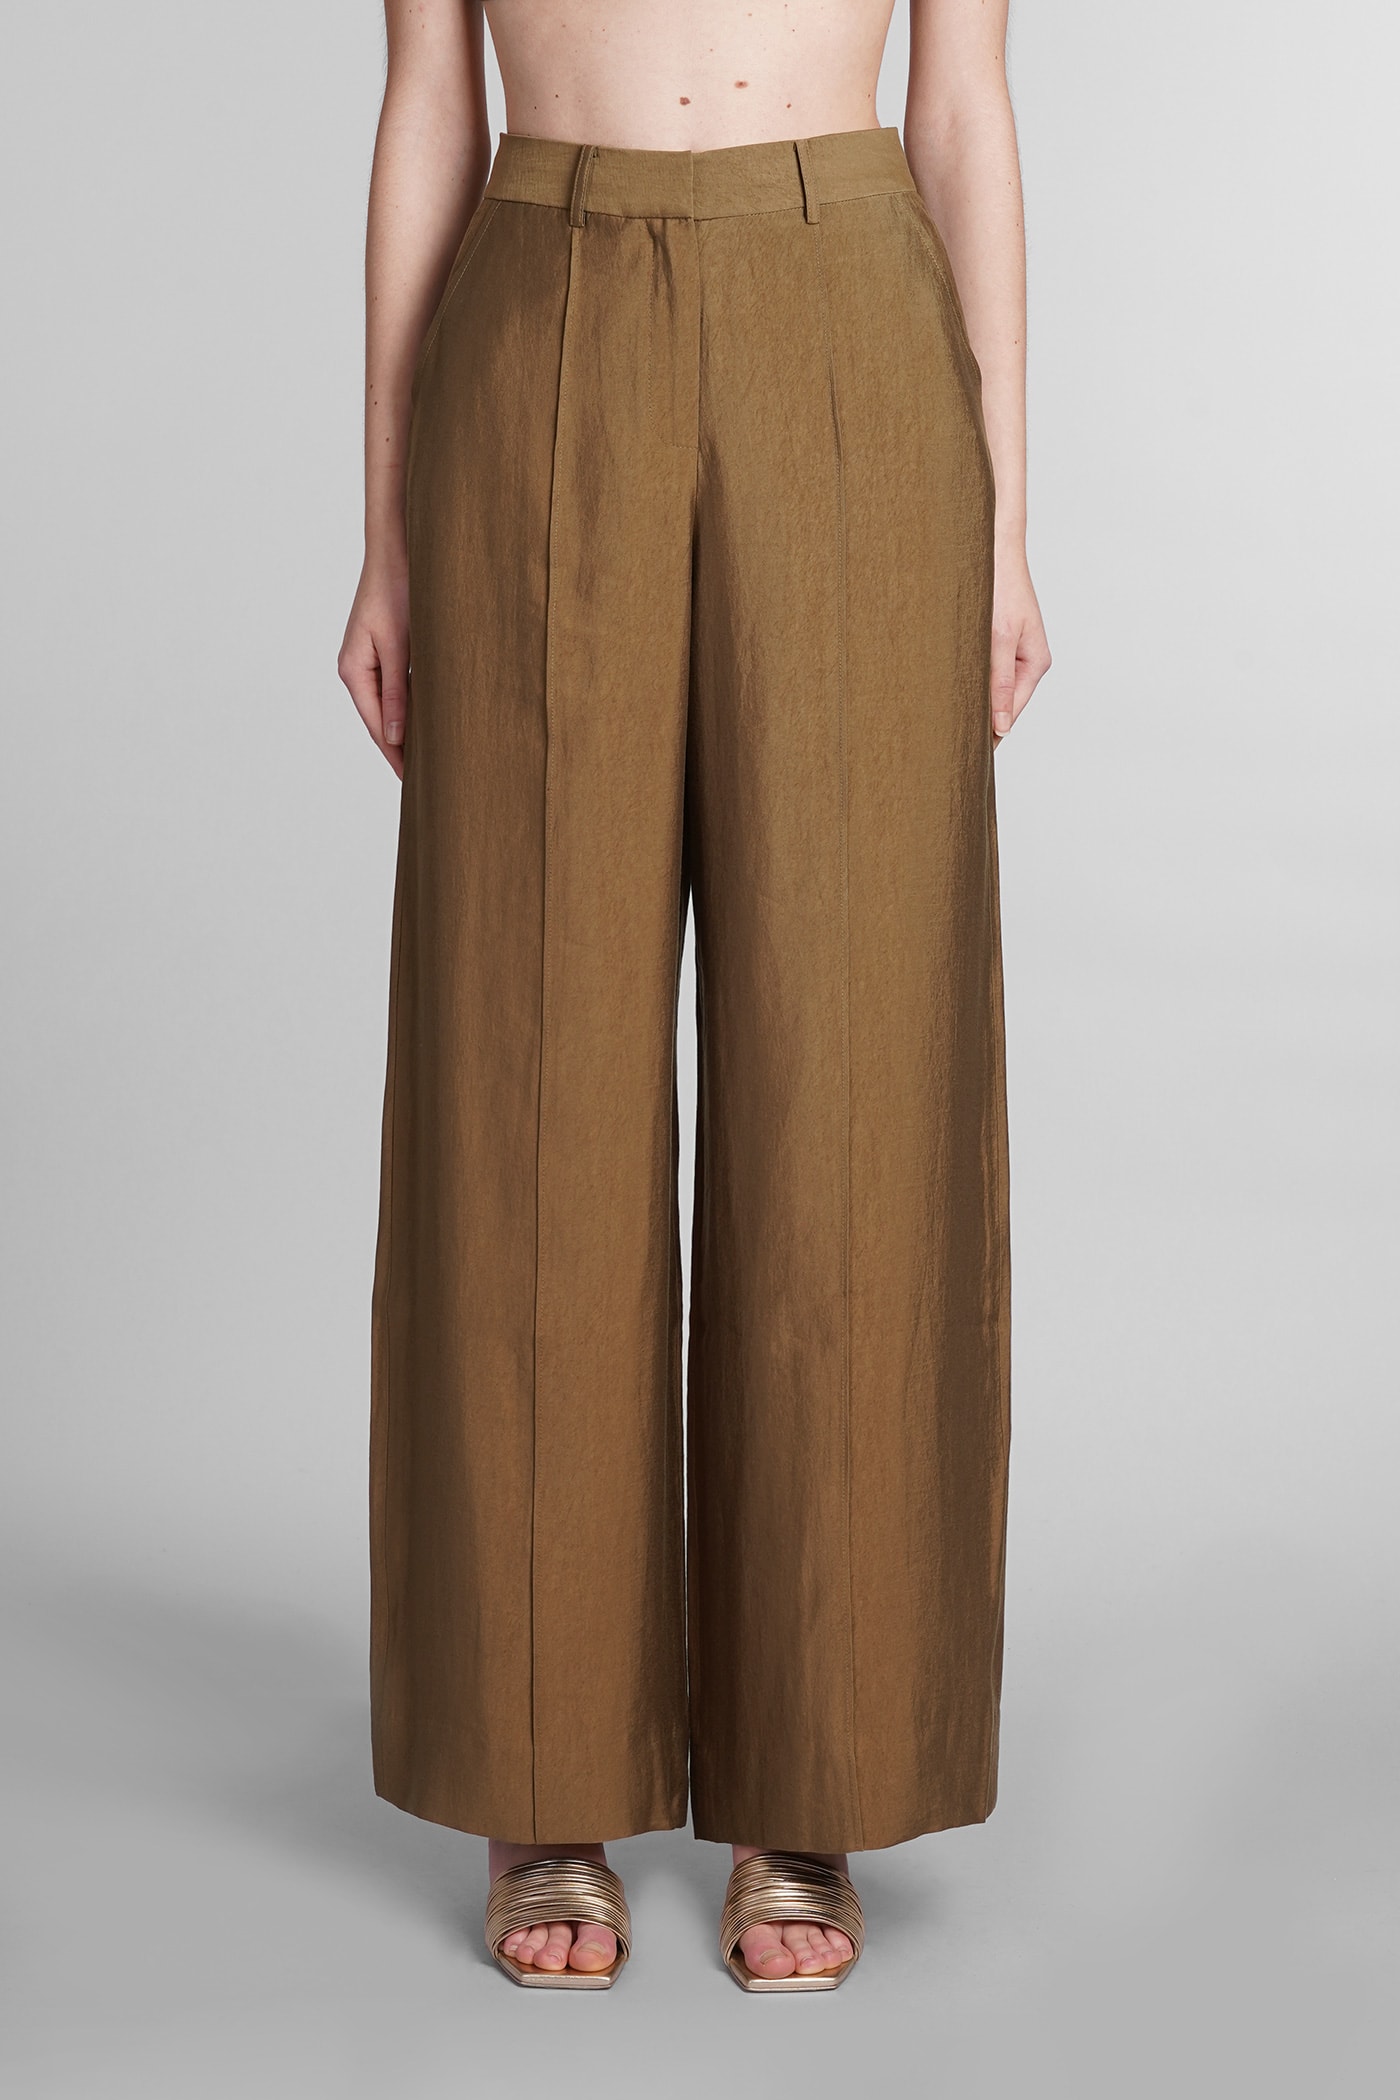 Cult Gaia Janine Pants In Brown Wool And Polyester